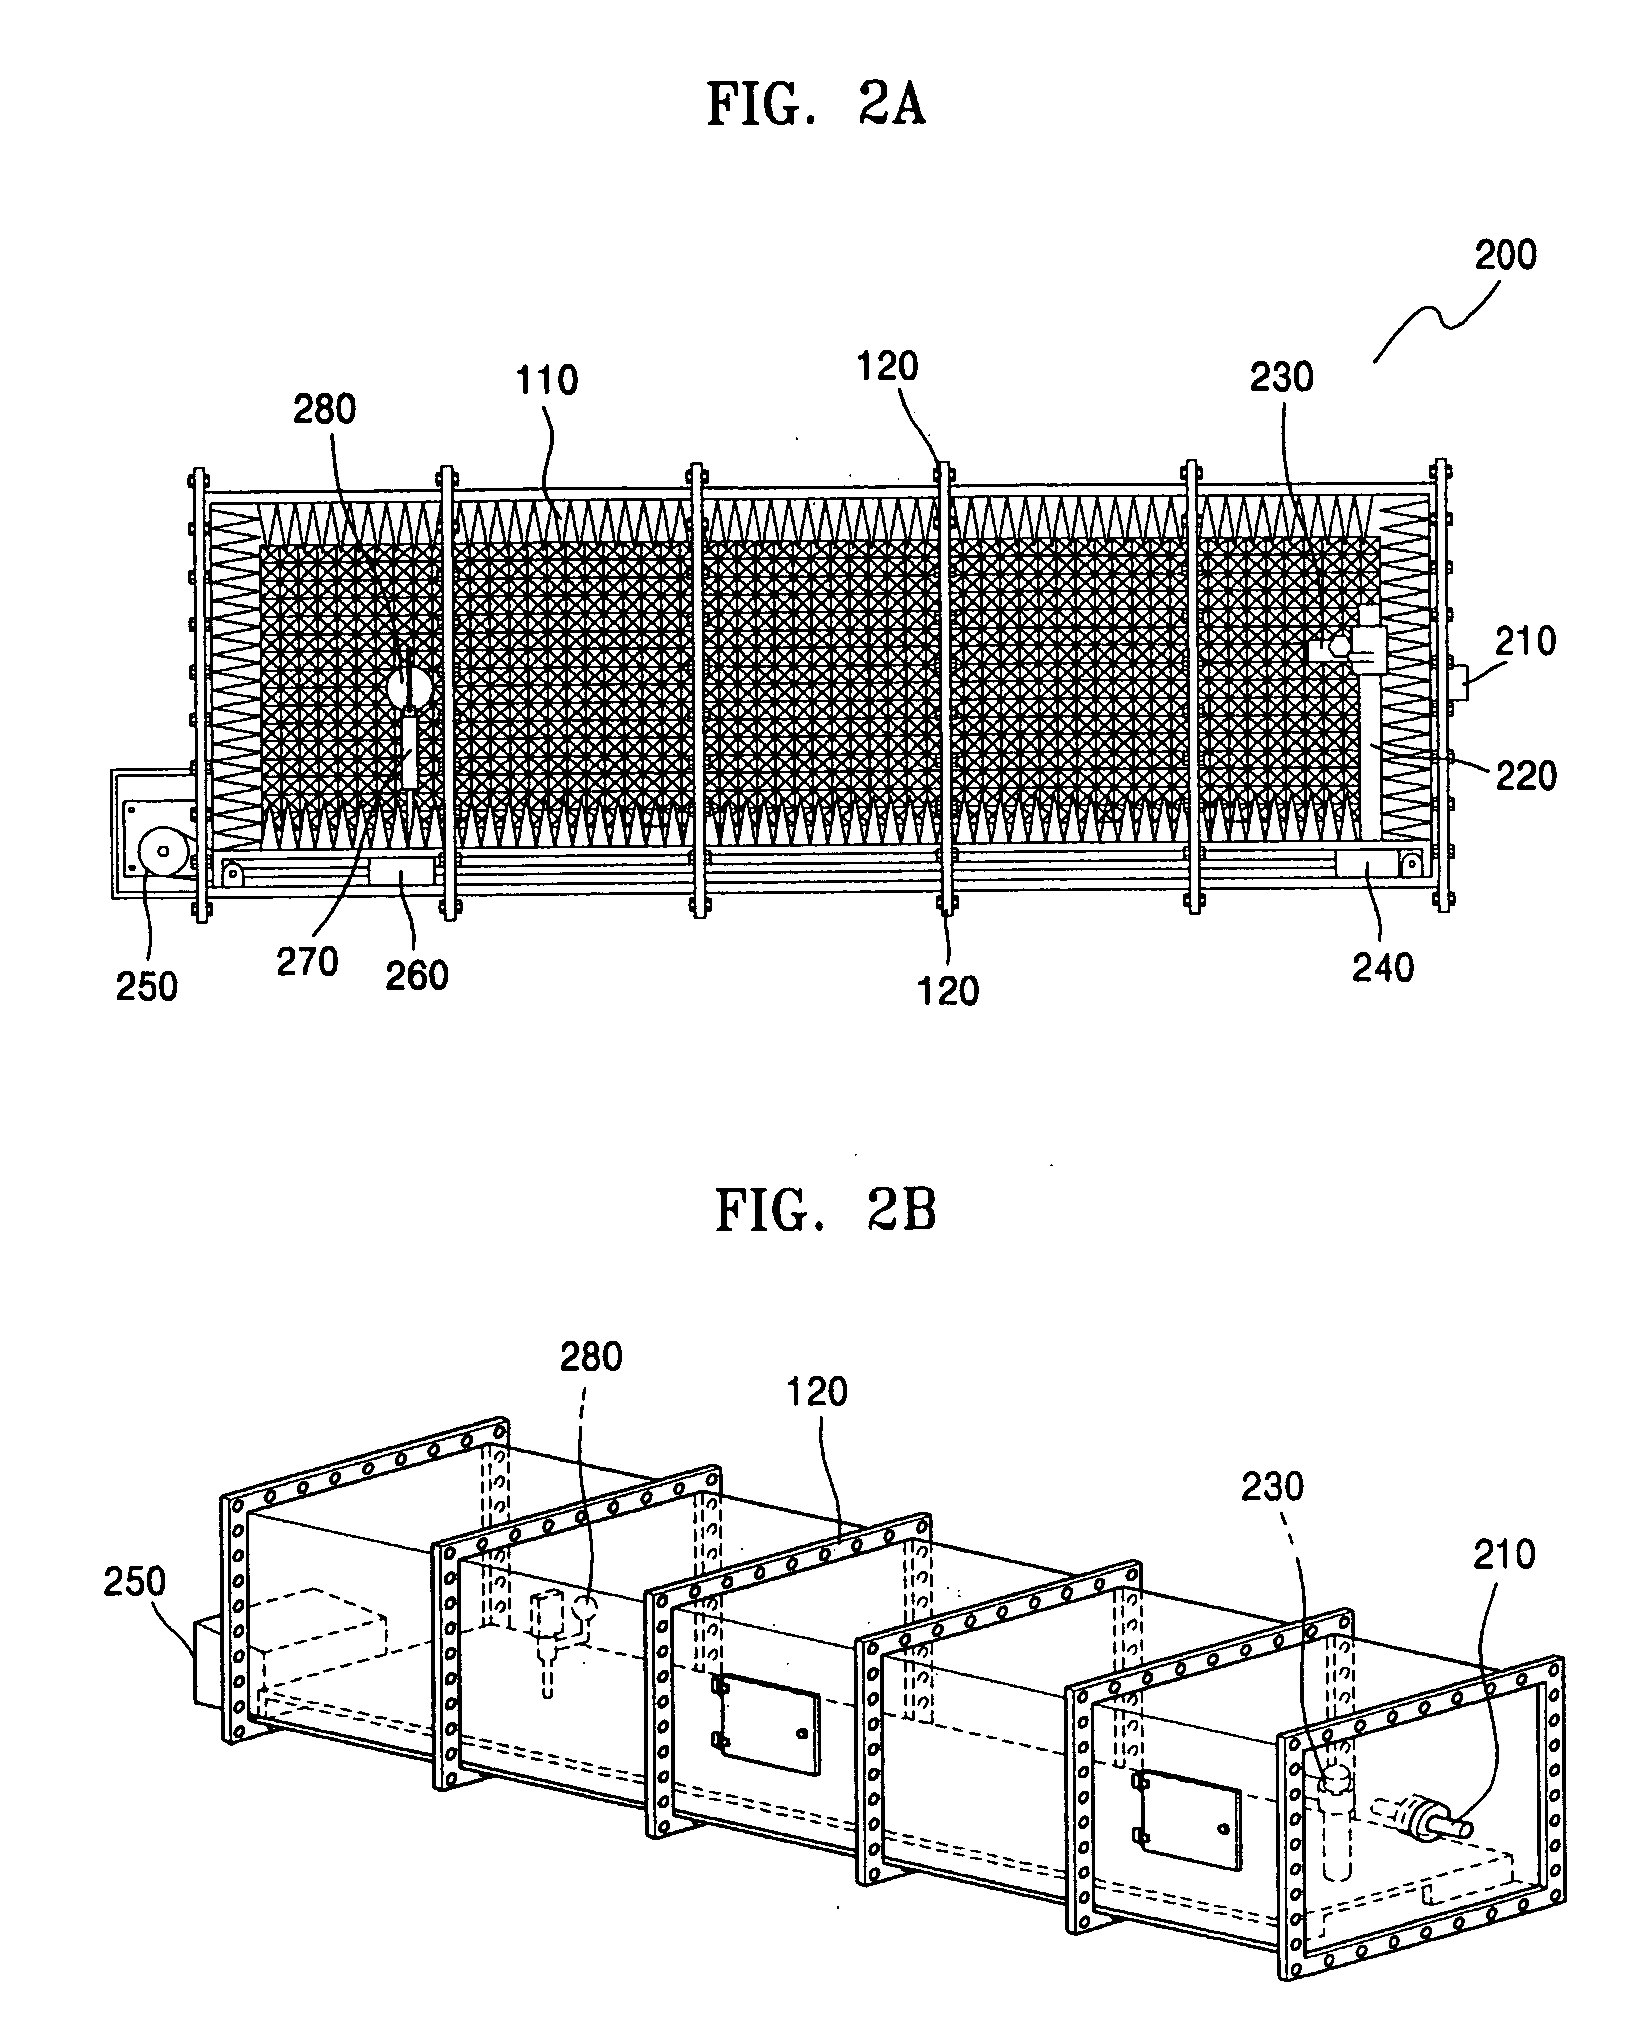 Apparatus for measuring read range between RFID tag and reader